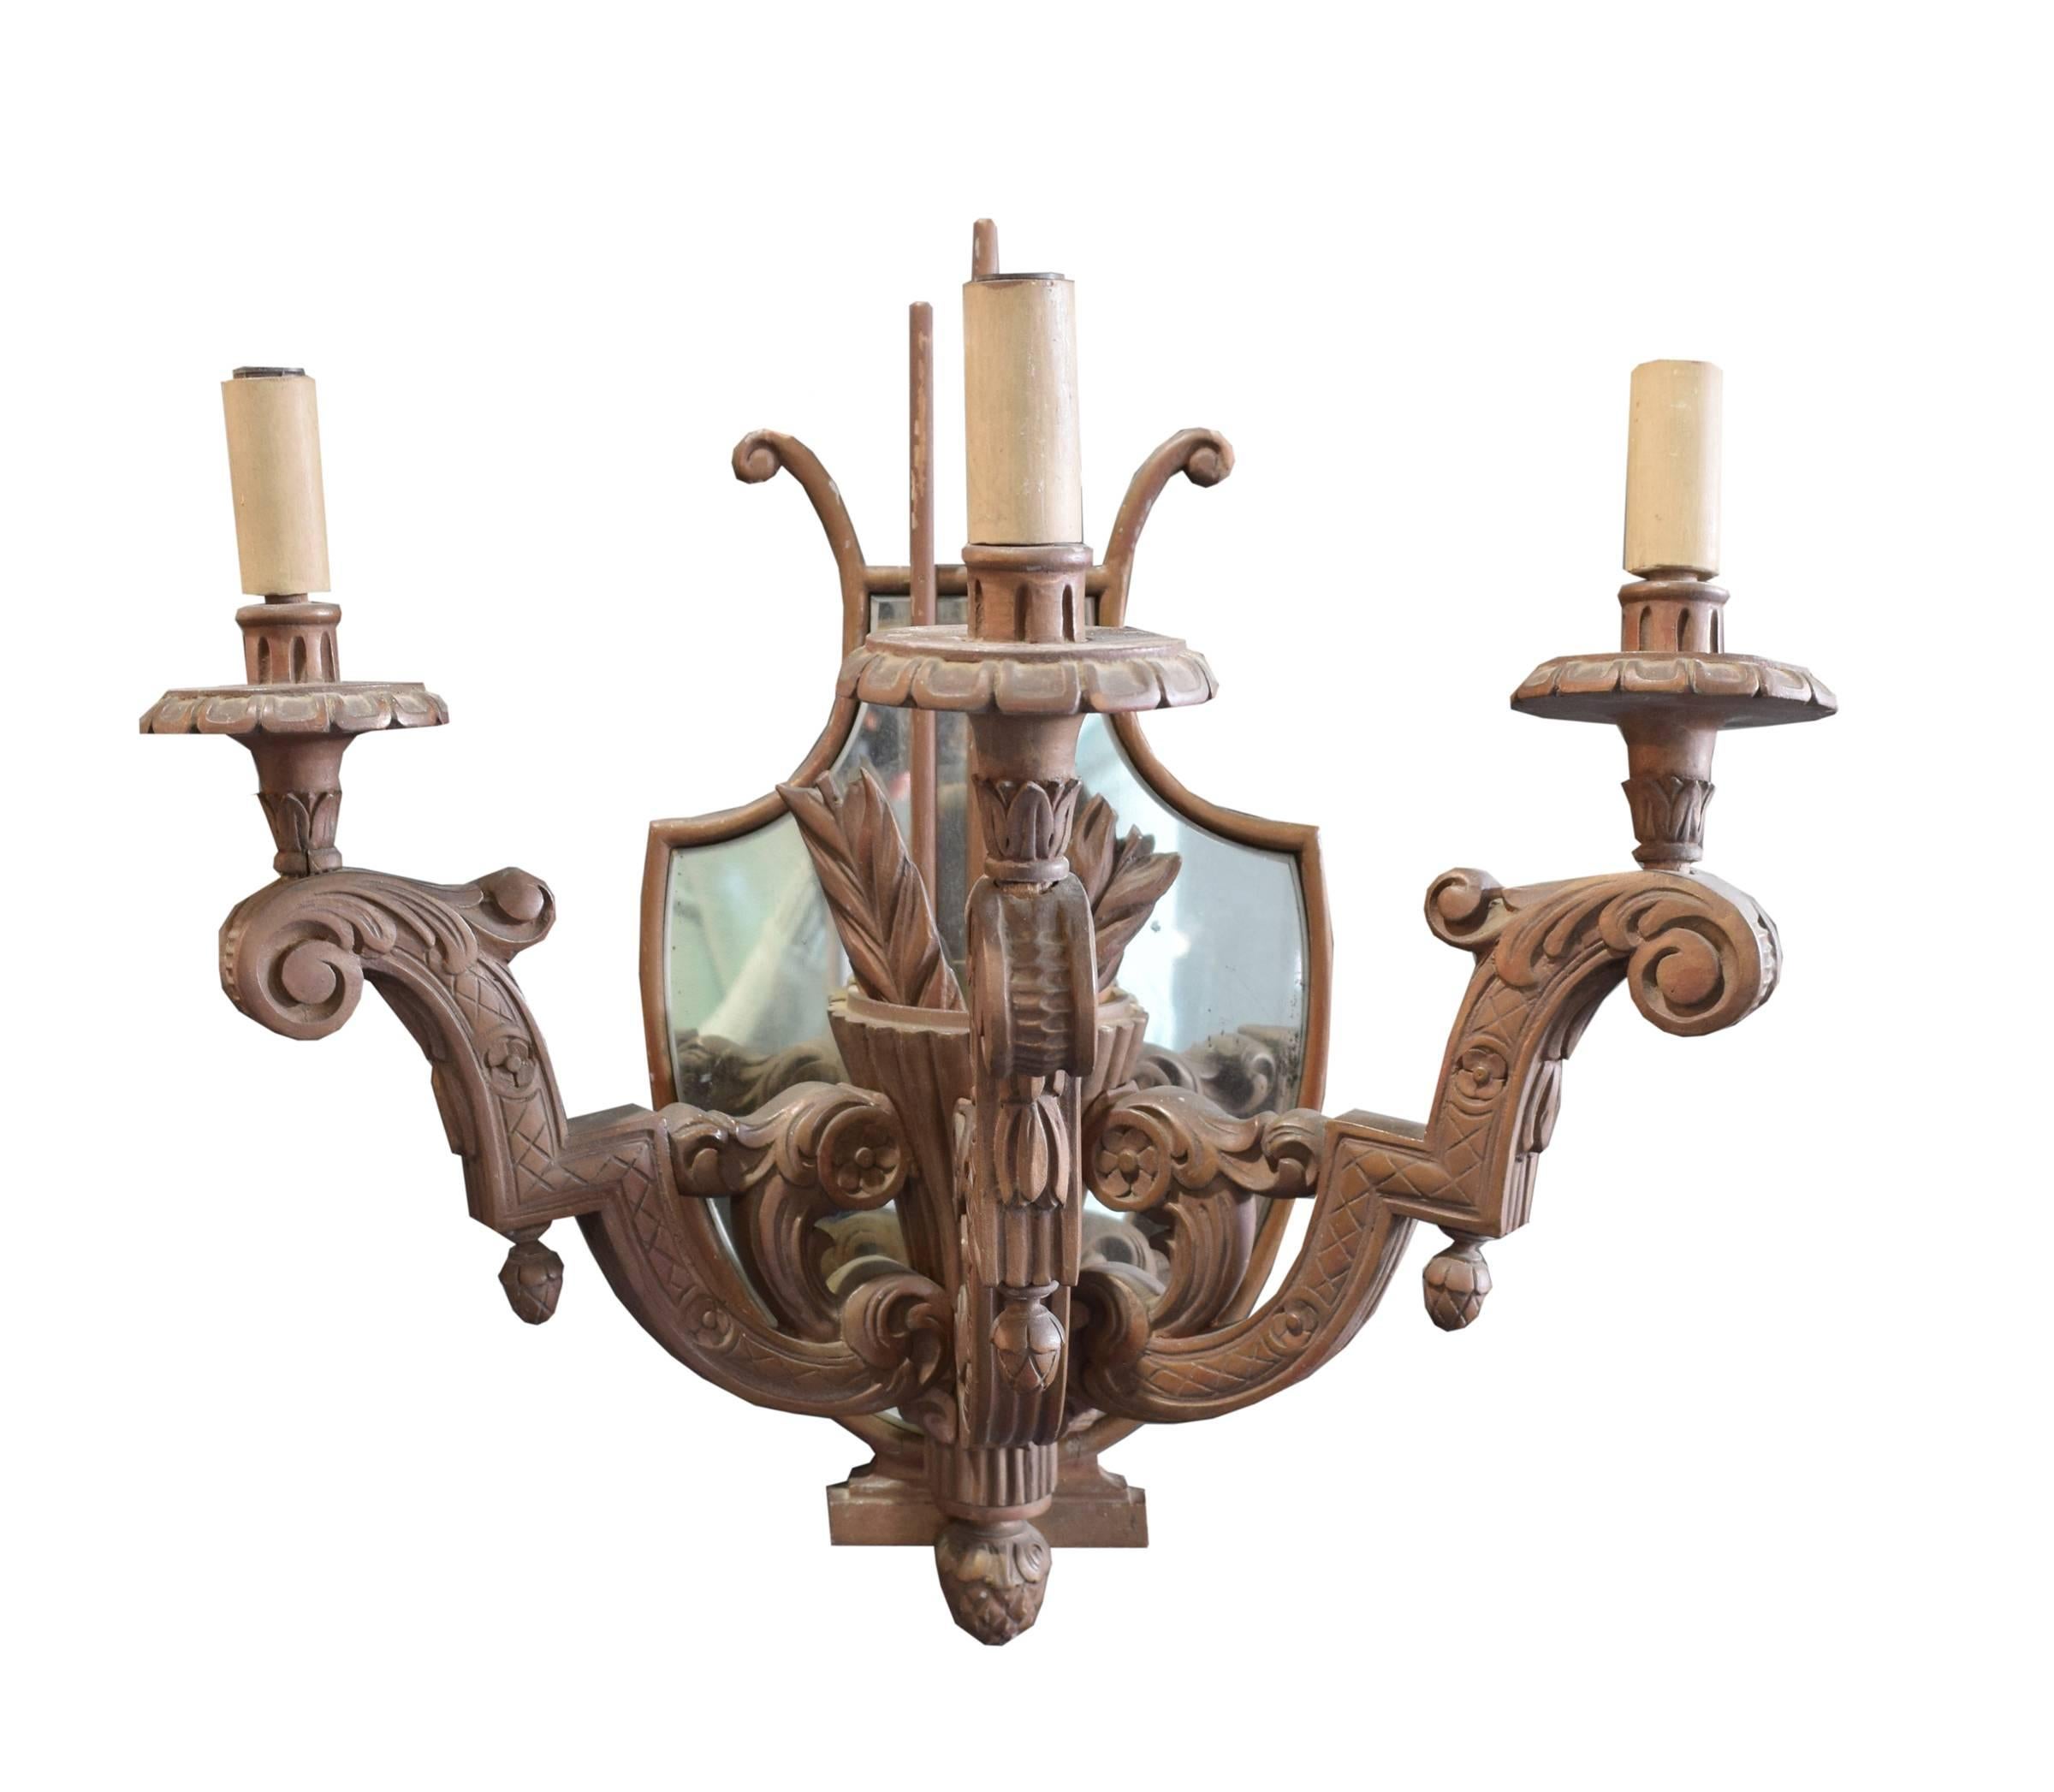 Pair of Argentine heavily carved three-arm wood sconces with quivers with arrows and mirrored backs, circa 1920. Needs to be wired.